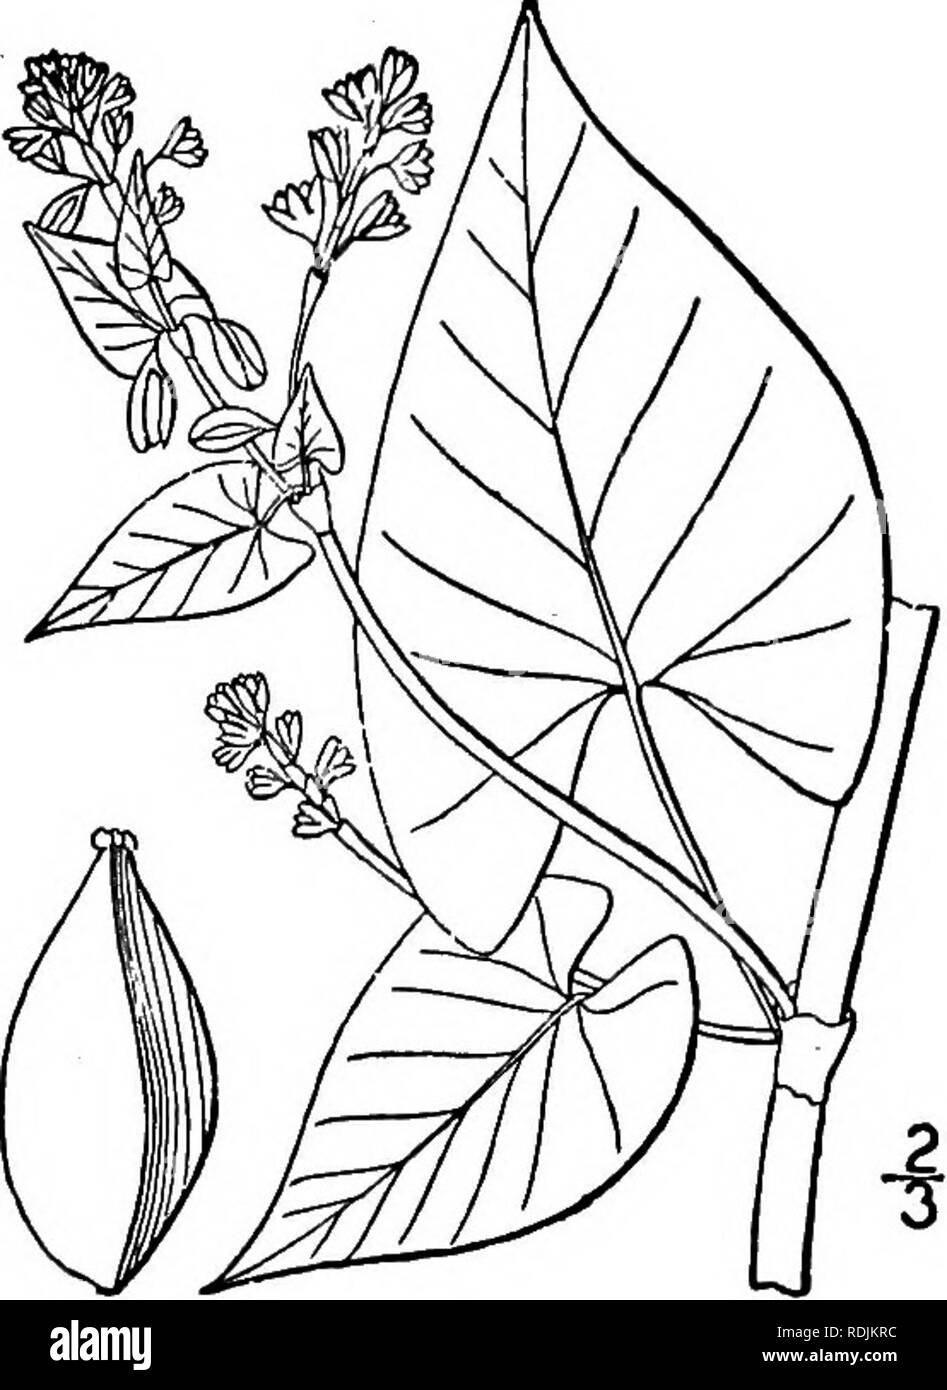 . An illustrated flora of the northern United States, Canada and the British possessions, from Newfoundland to the parallel of the southern boundary of Virginia, and from the Atlantic Ocean westward to the 102d meridian. Botany; Botany. 3. Tiniaria scandens (L.) Small. Climbing False Buckwheat. Fig. 1652. Polygonum scandens L. Sp. PI. 364. 1753. Tiniaria scandens Small, Fl. SE. U. S. 382. 1903. Perennial, glabrous, stem climbing, 2°-20° long, rather stout, striate, branched, rough on the ridges. Leaves ovate, acuminate, cordate at the base, i'-6' long or the upper smaller, the larger long-peti Stock Photo